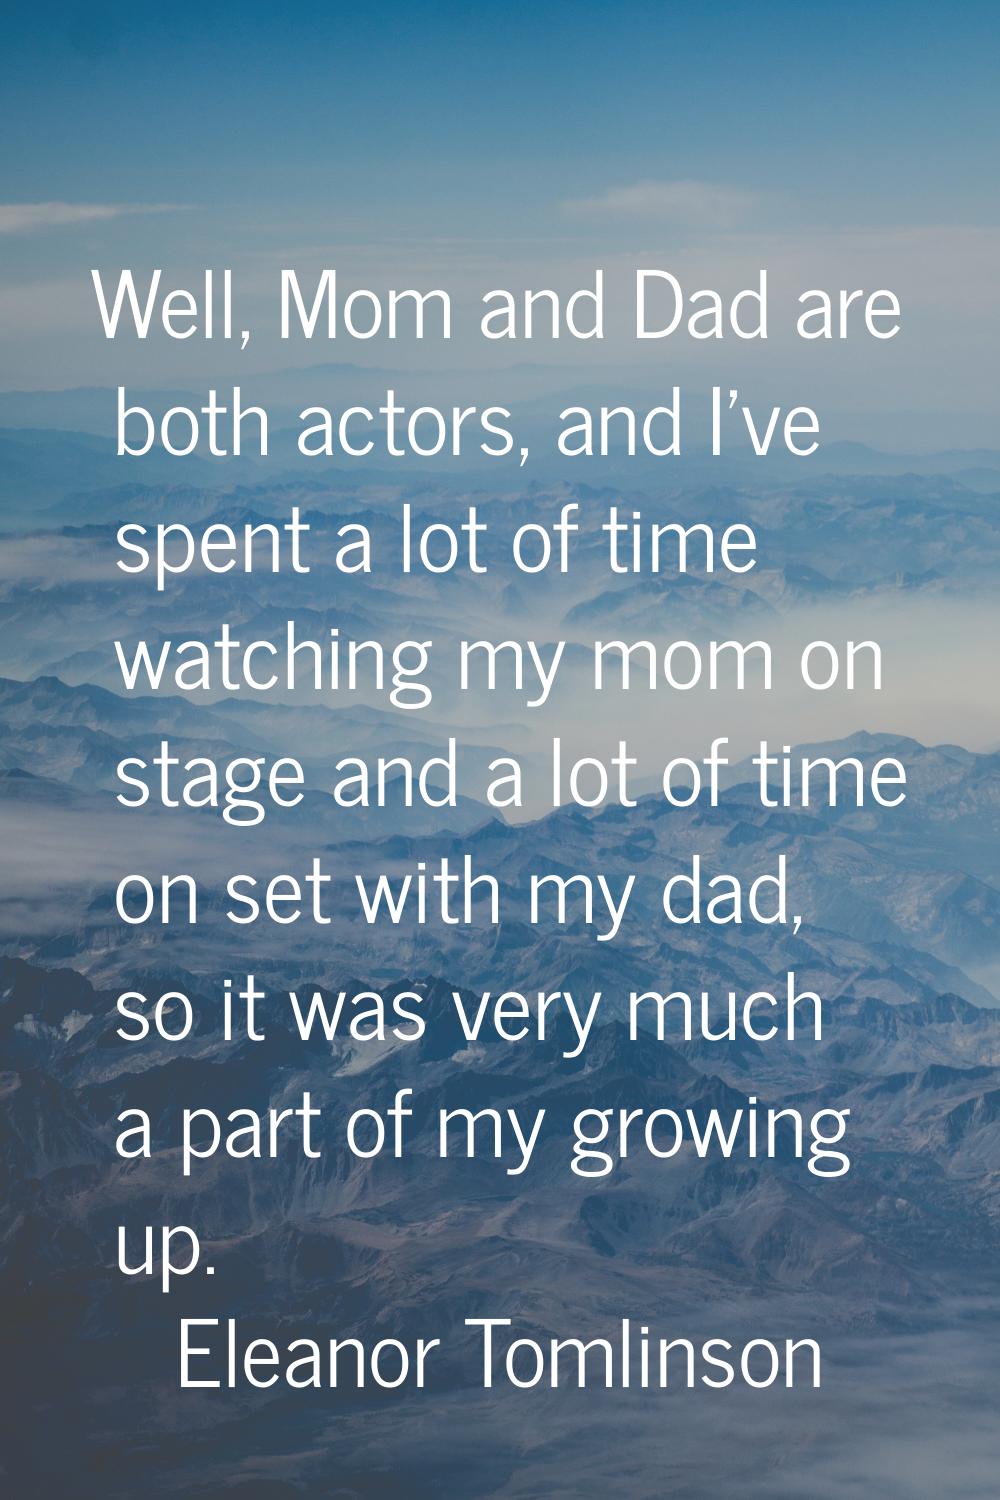 Well, Mom and Dad are both actors, and I've spent a lot of time watching my mom on stage and a lot 